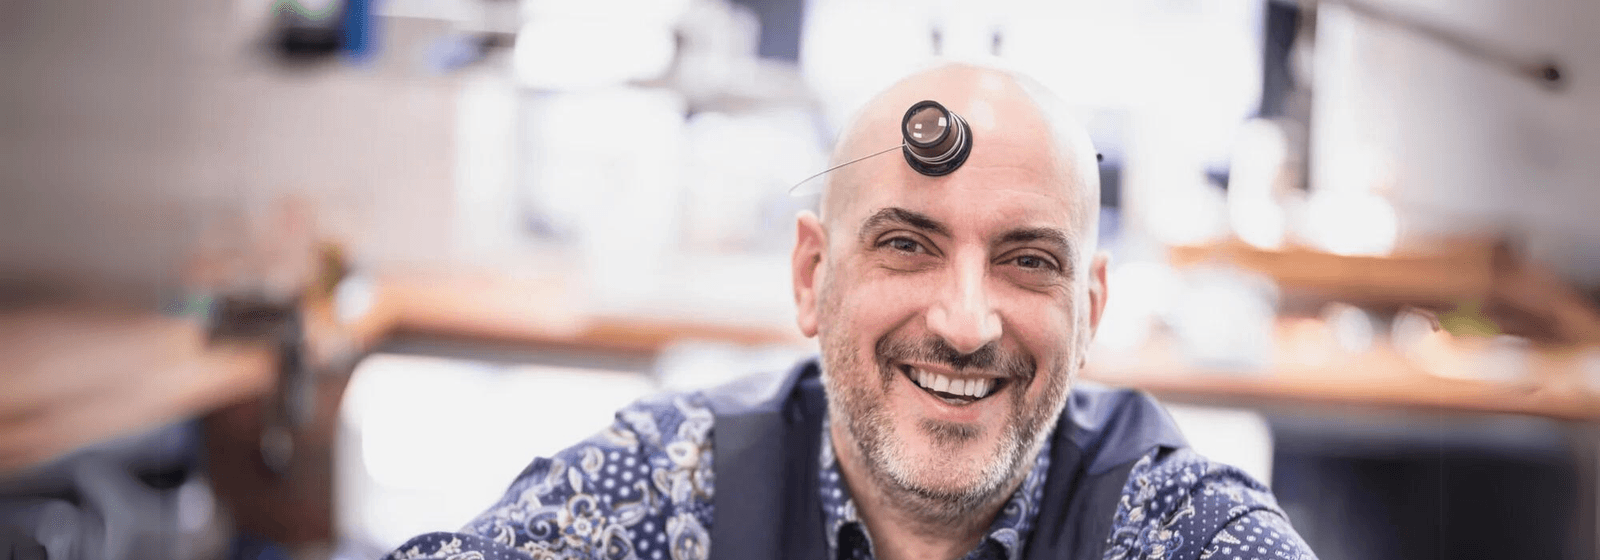 In Conversation With: Armand Billard, Founder Of Sartory Billard On Independent Watchmaking And More